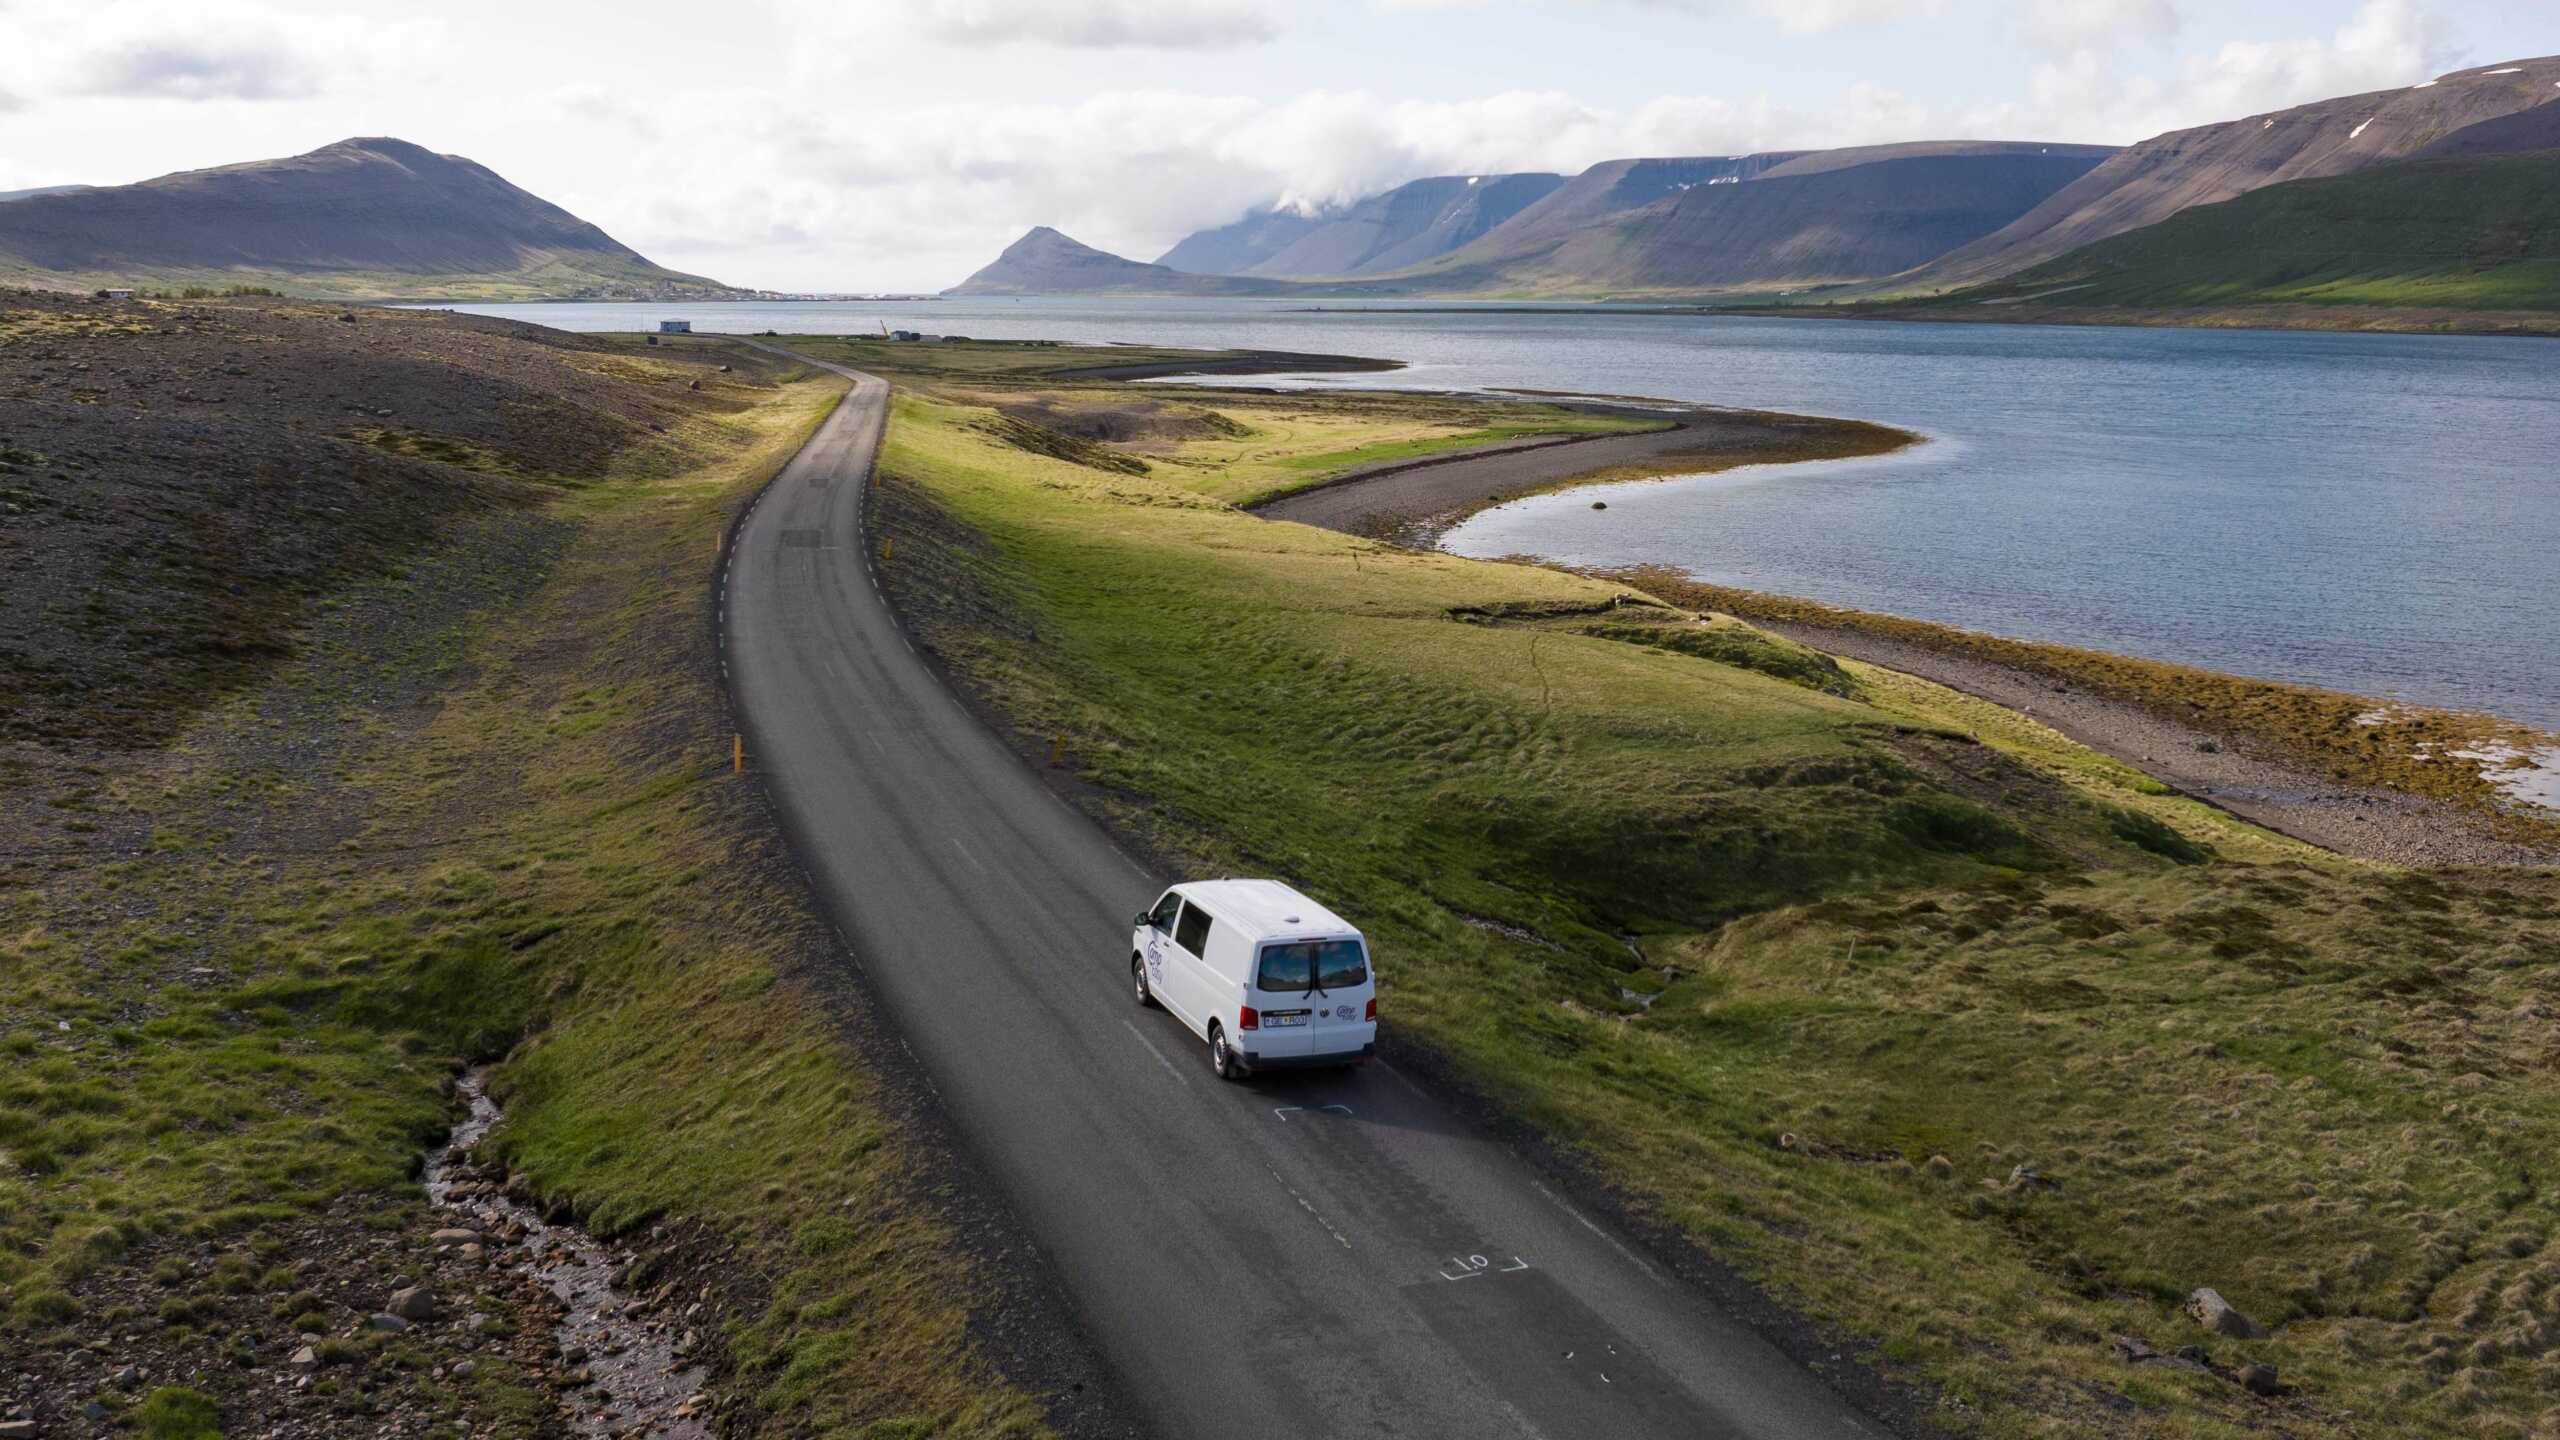 Campervan on the road surrounded by Icelandic fjord and mountains